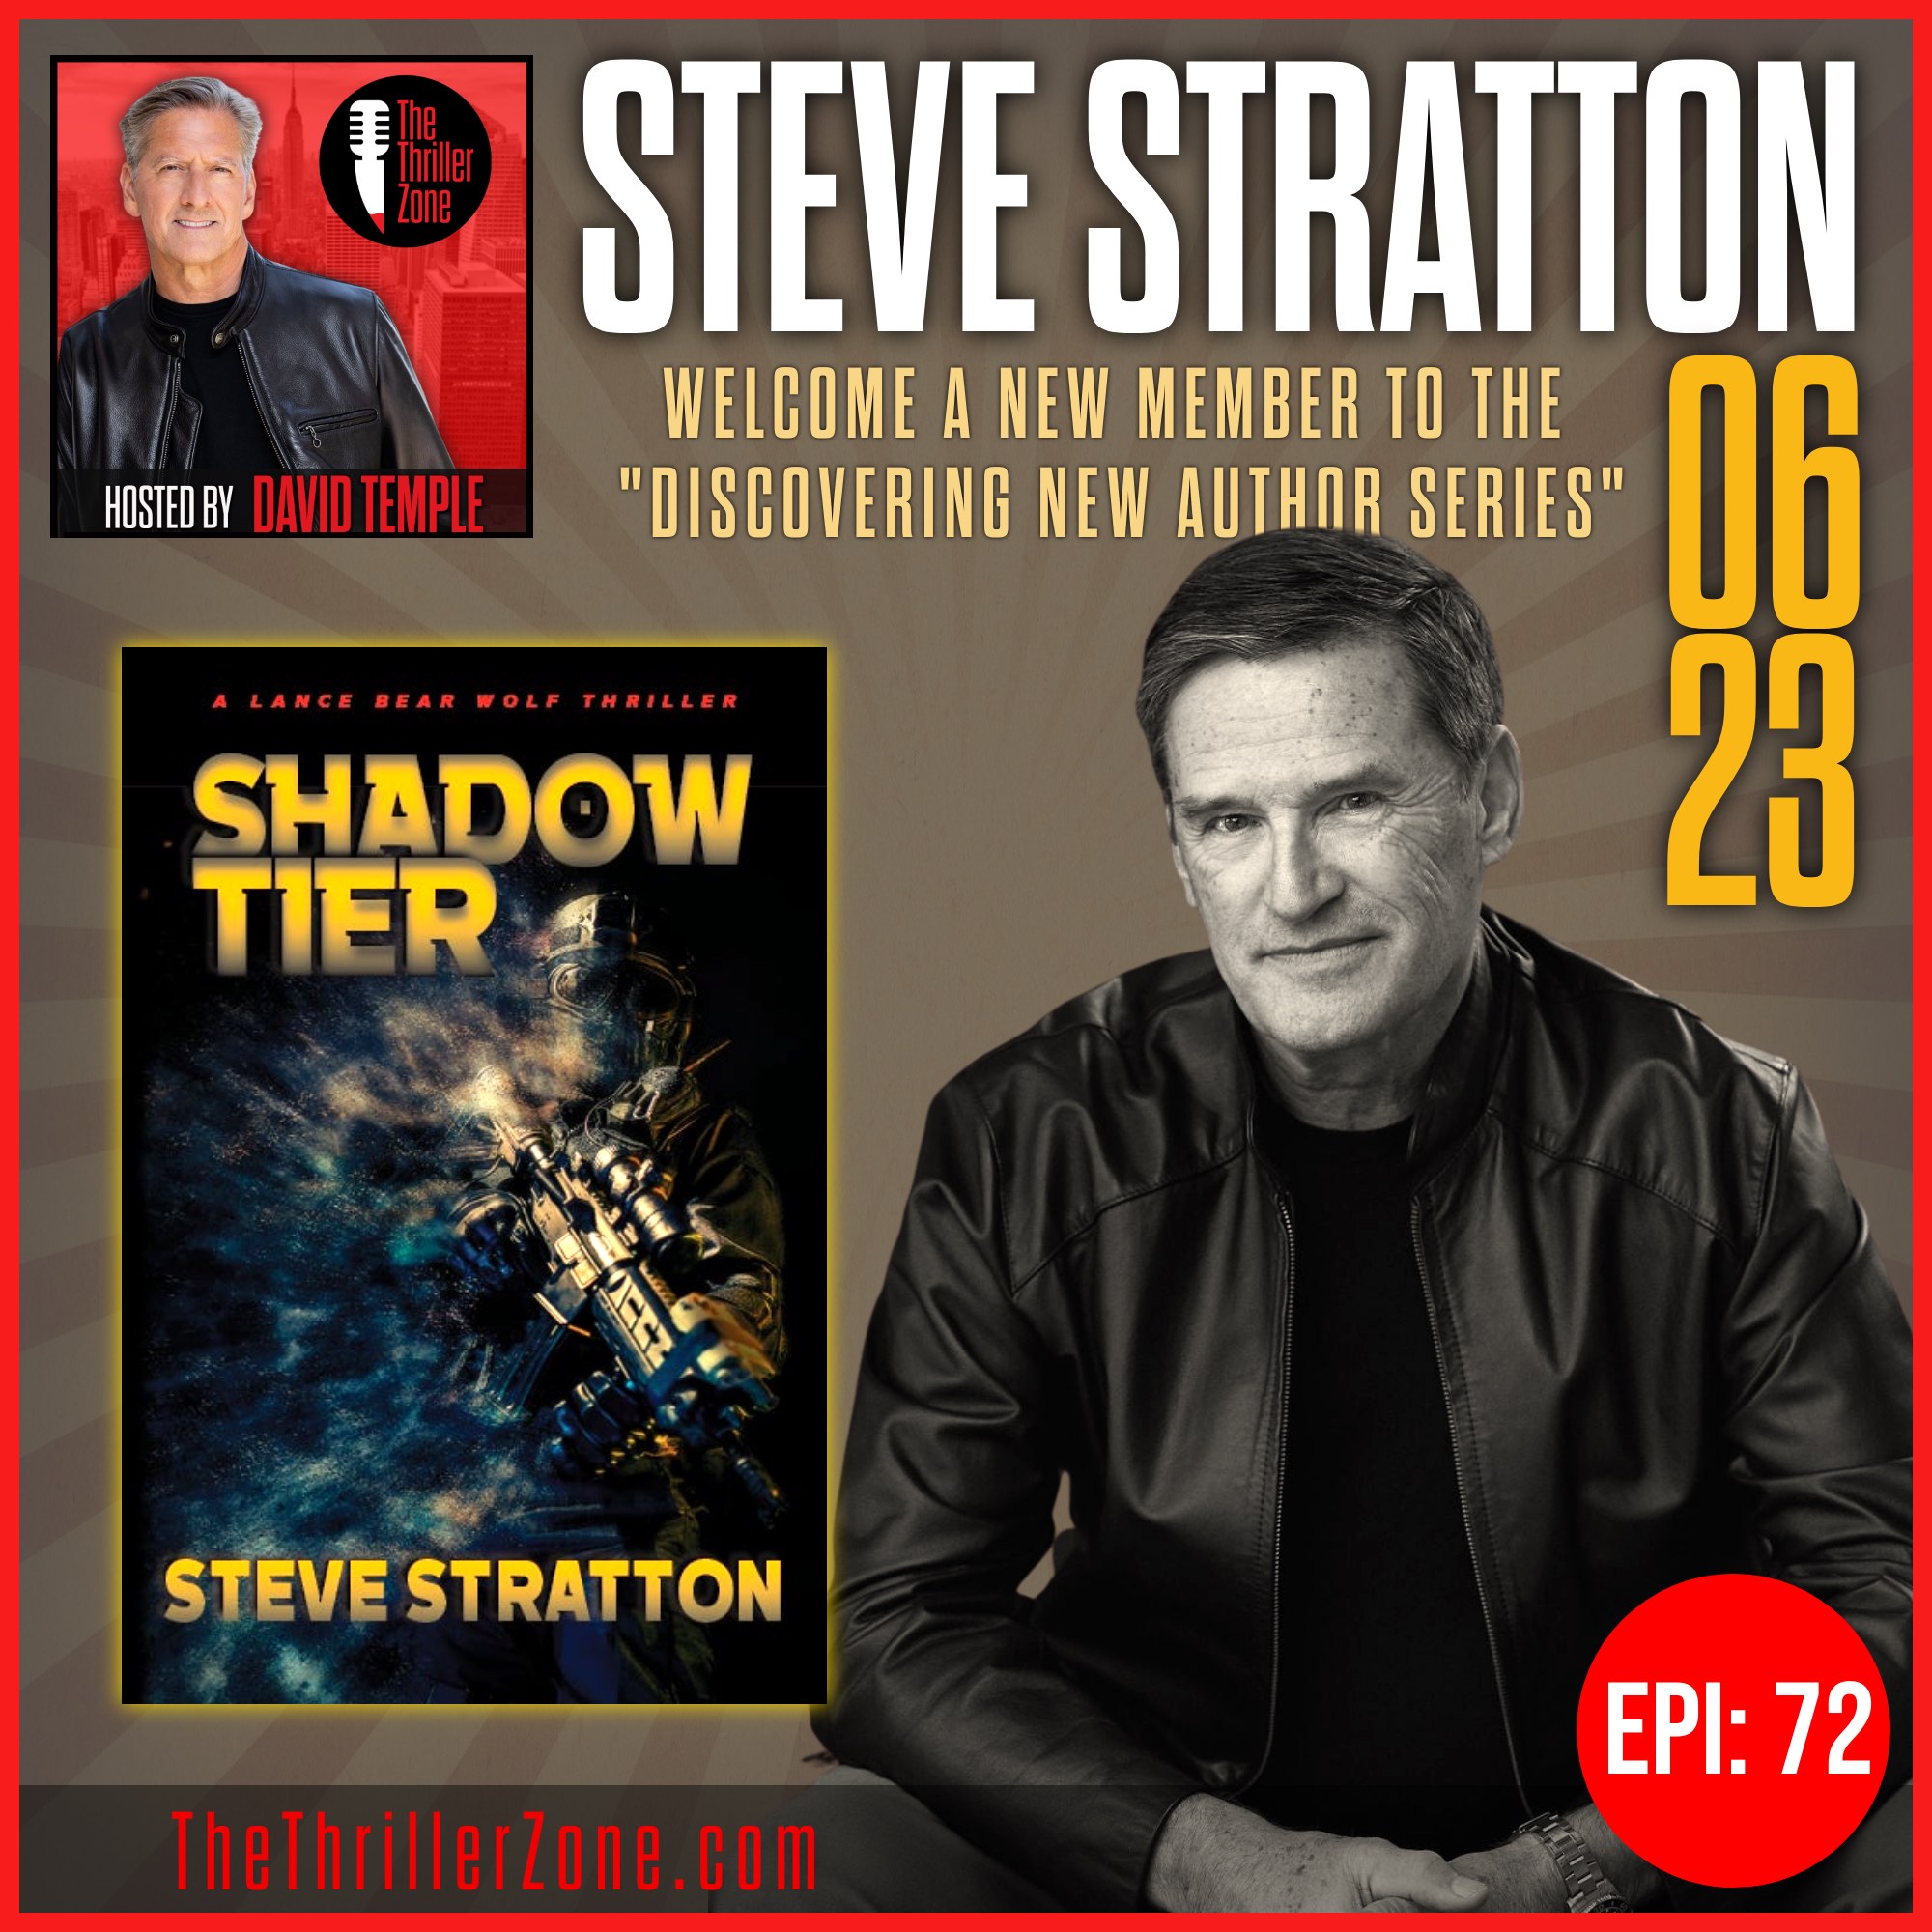 Steve Stratton, author of Shadow Tier Image